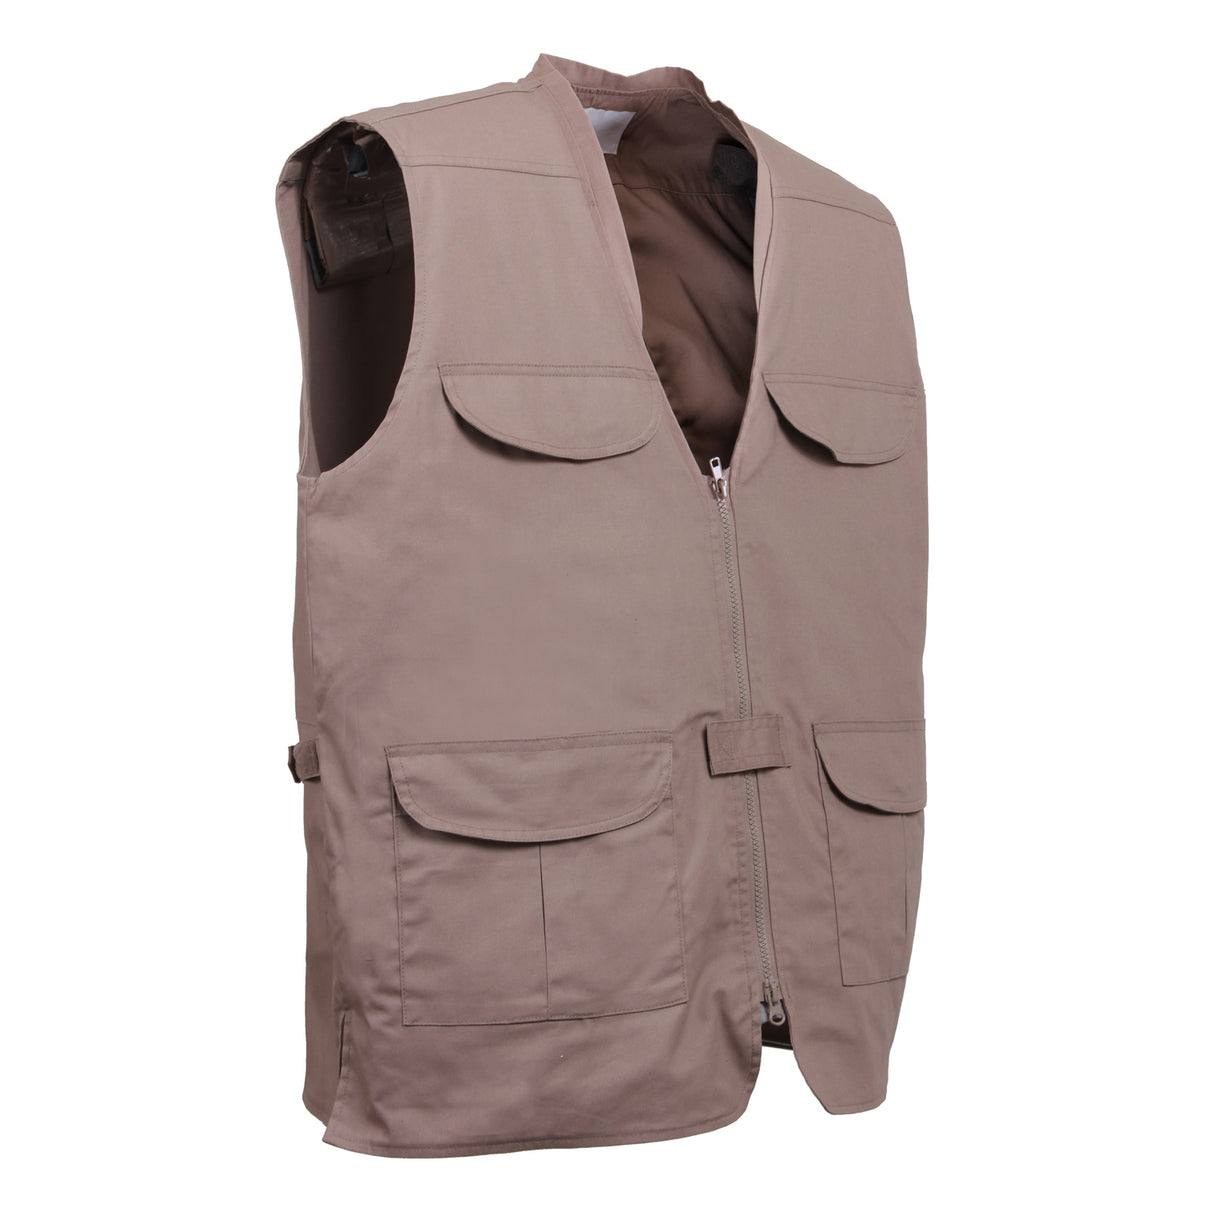 Khaki Lightweight Concealed Carry Vest - Rothco Ambidextrous CCW Tacti ...